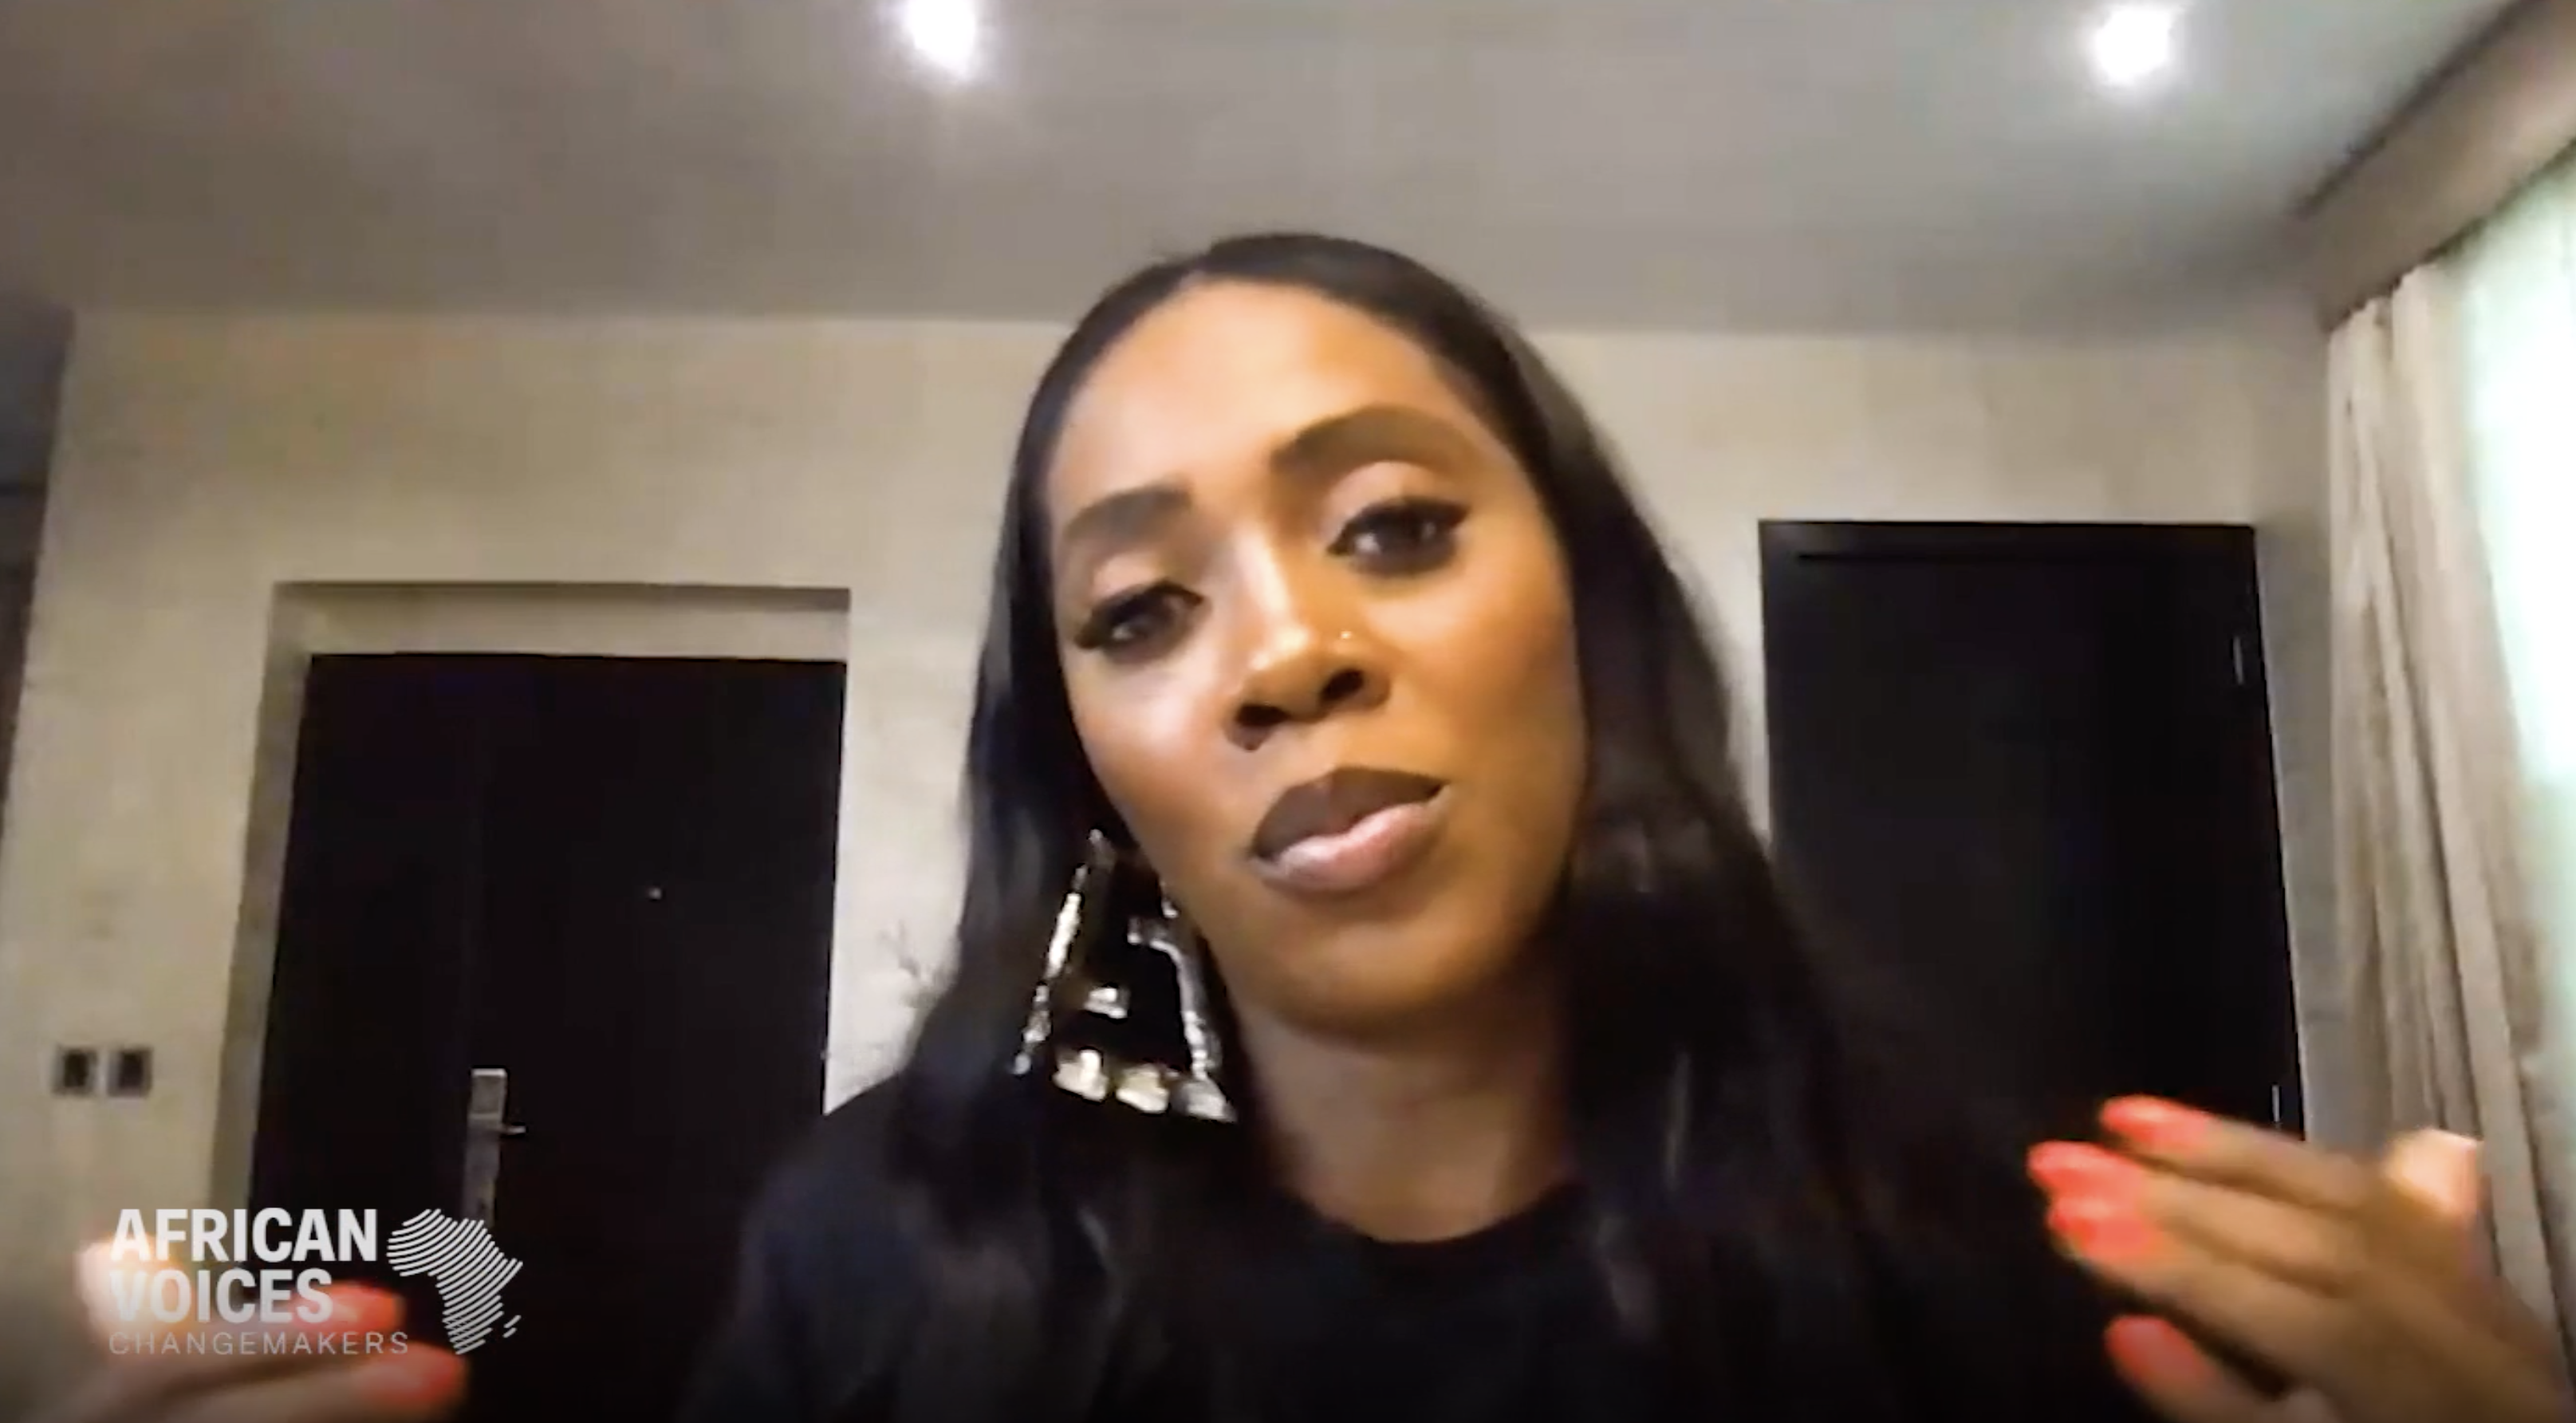 CNN’s African Voices Changemakers Meets Tiwa Savage-marketingspace.com.ng